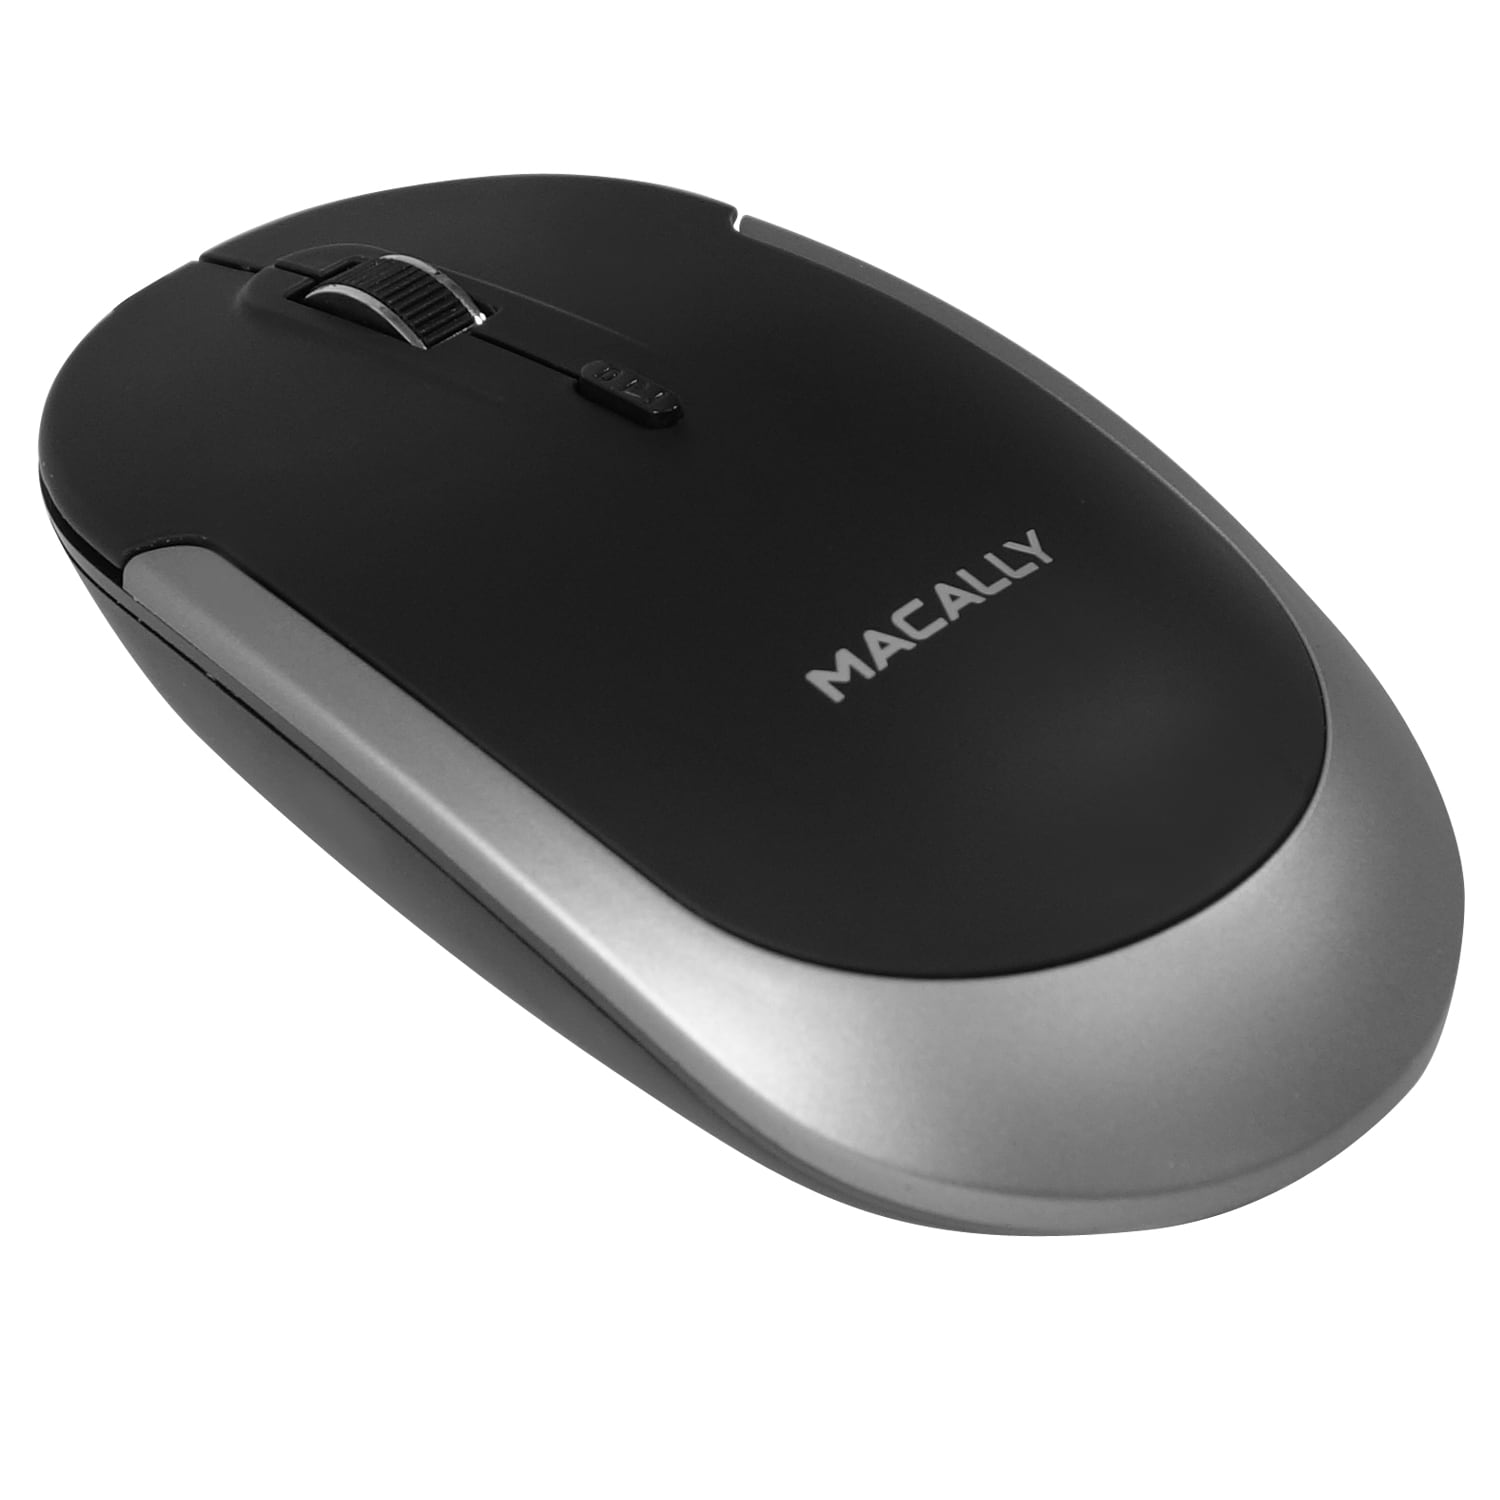 chef Maak leven omverwerping Macally Macally Silent Wireless Bluetooth Mouse for Apple Mac or Windows PC  Laptop/Desktop Computer, Slim & Compact Mice Design with Optical Sensor &  DPI Switch 800/1200/1600, Small for Easy Travel, Black(BTDYNAMOUSE) in